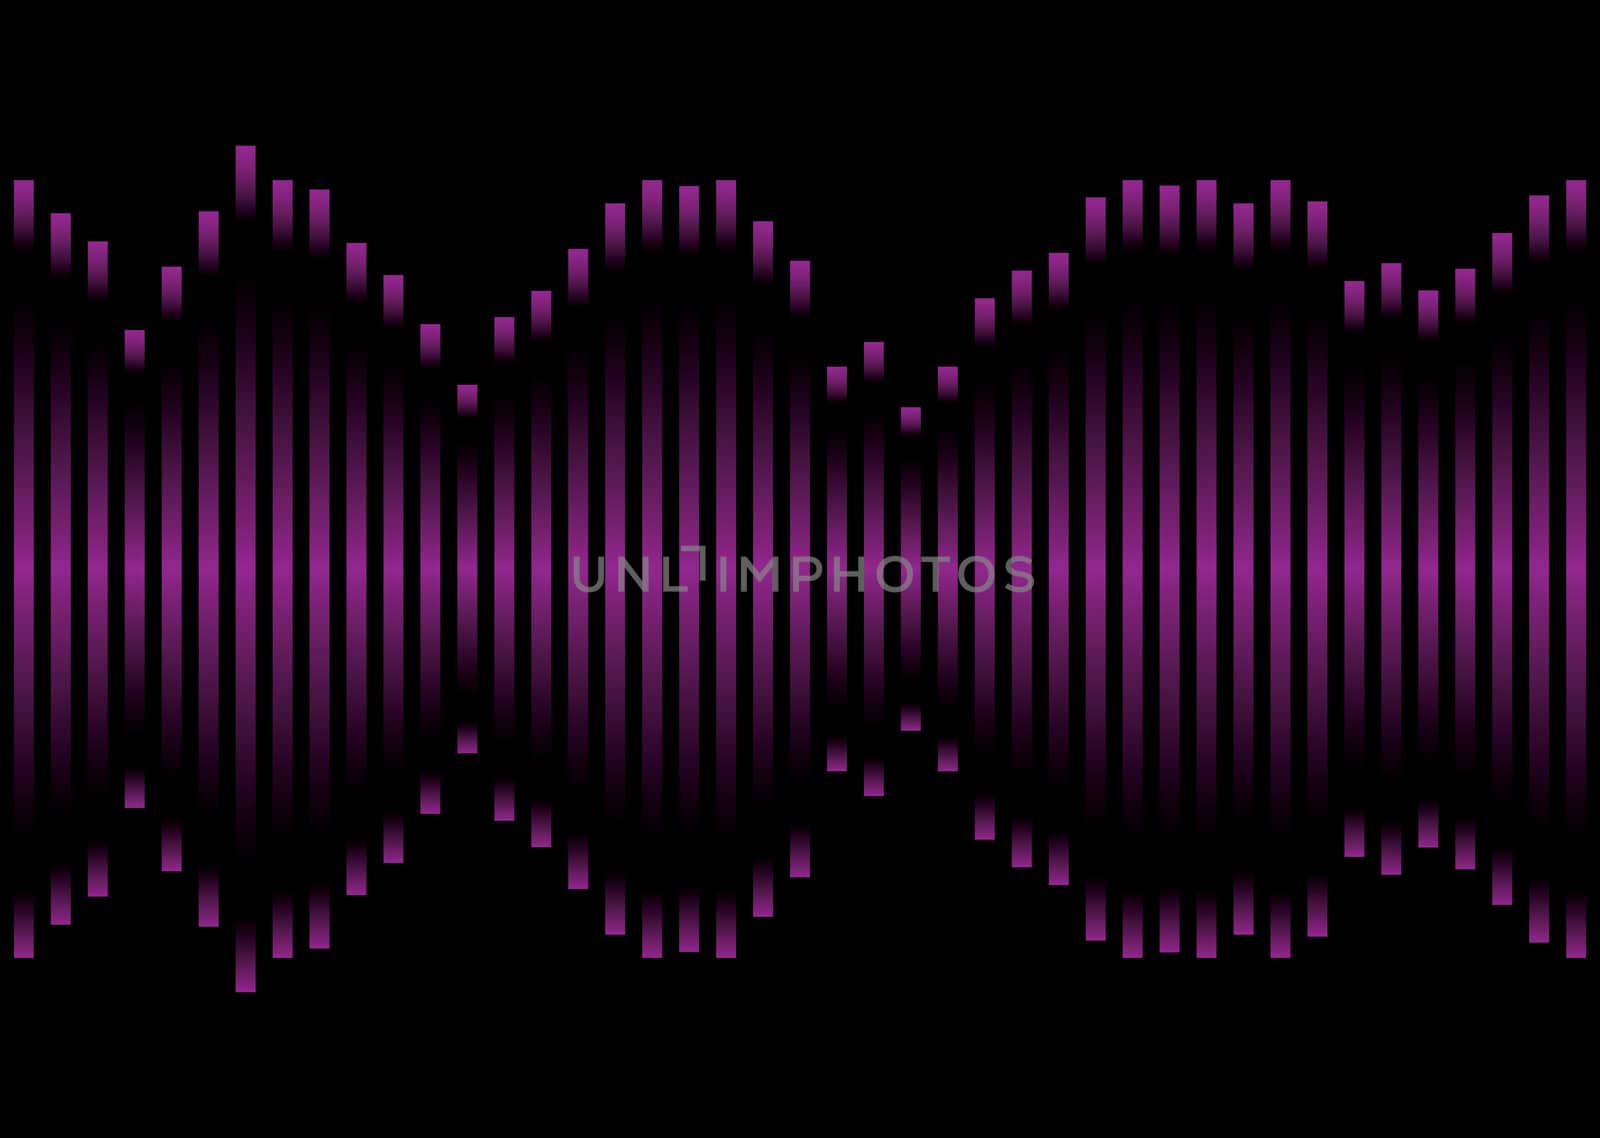 Music inspired graphic equaliser in pink and purple with black background